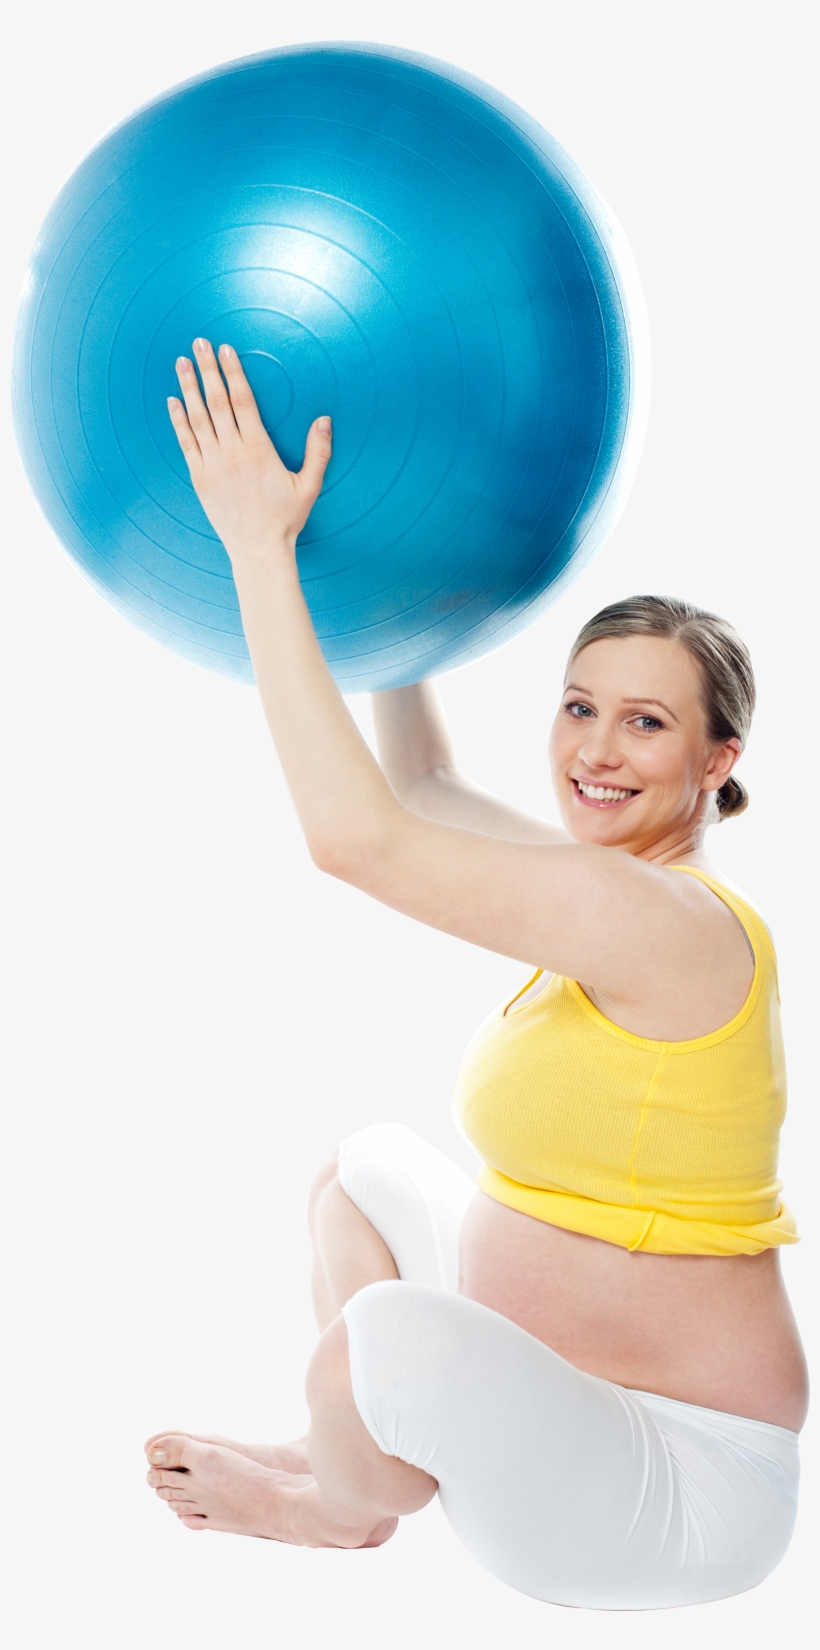 Pregnant Woman Exercise Png Image, transparent png #539620